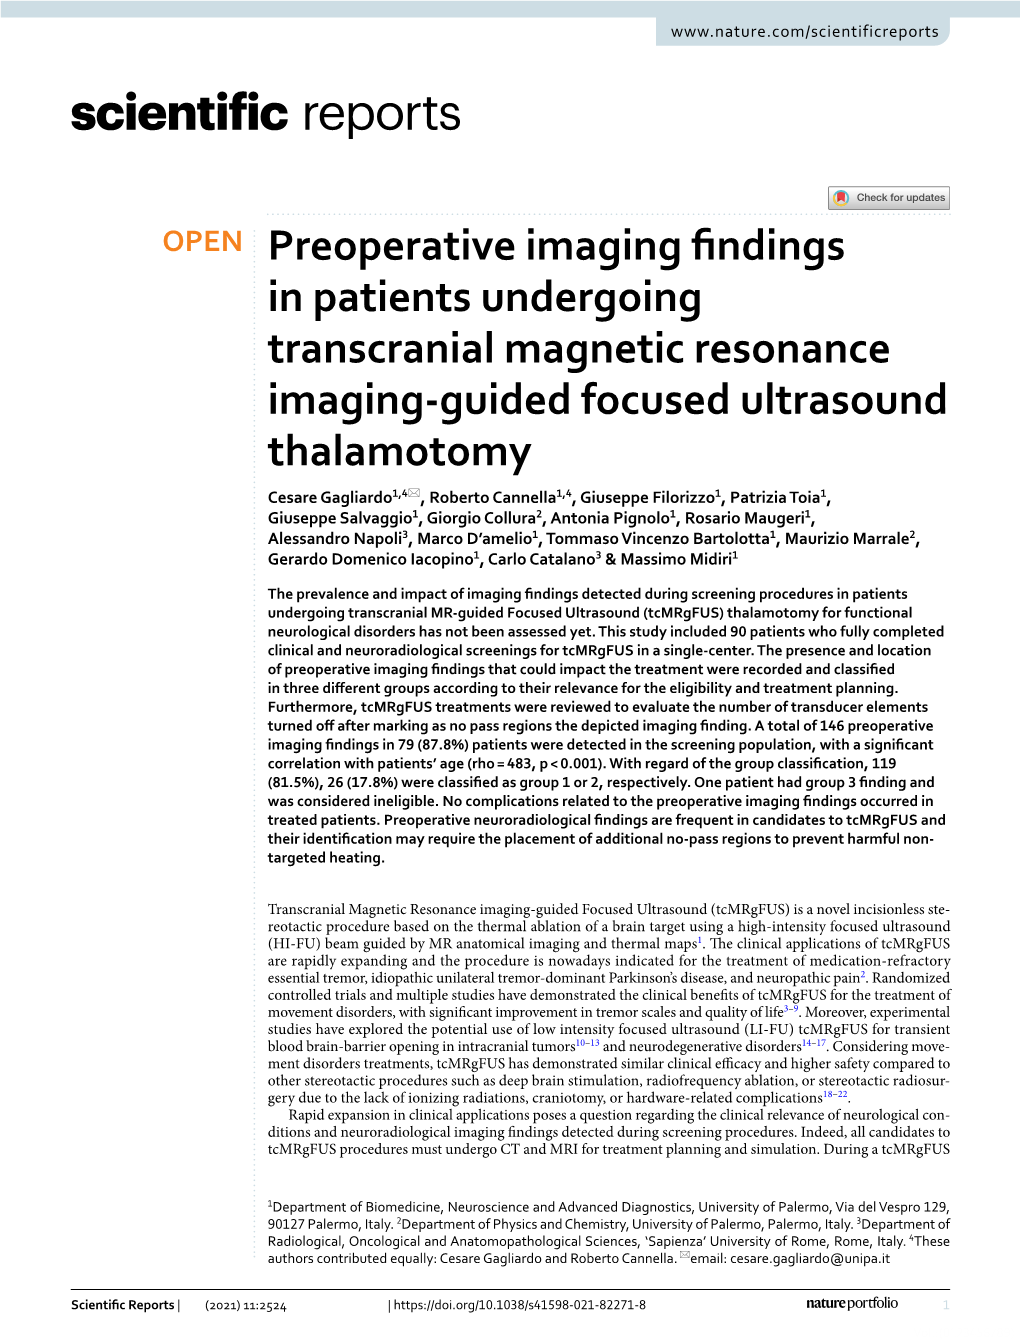 Preoperative Imaging Findings in Patients Undergoing Transcranial